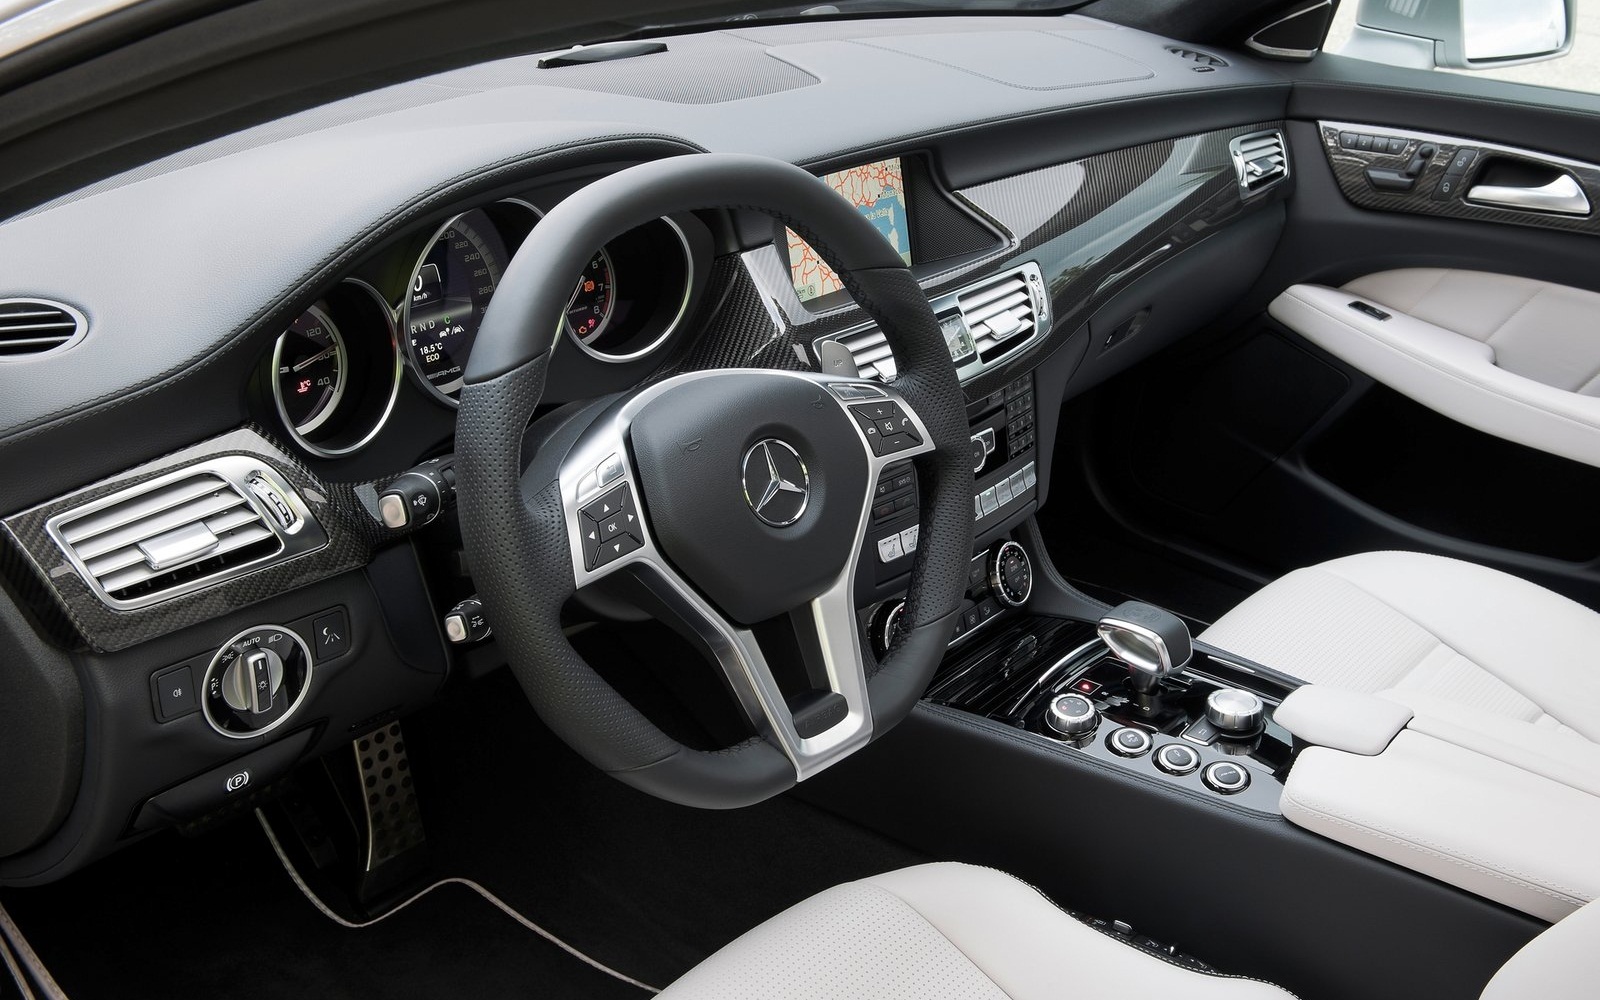 cls 500 w219 jeep cars wallpapers mercedes cls63 amg wallpapers